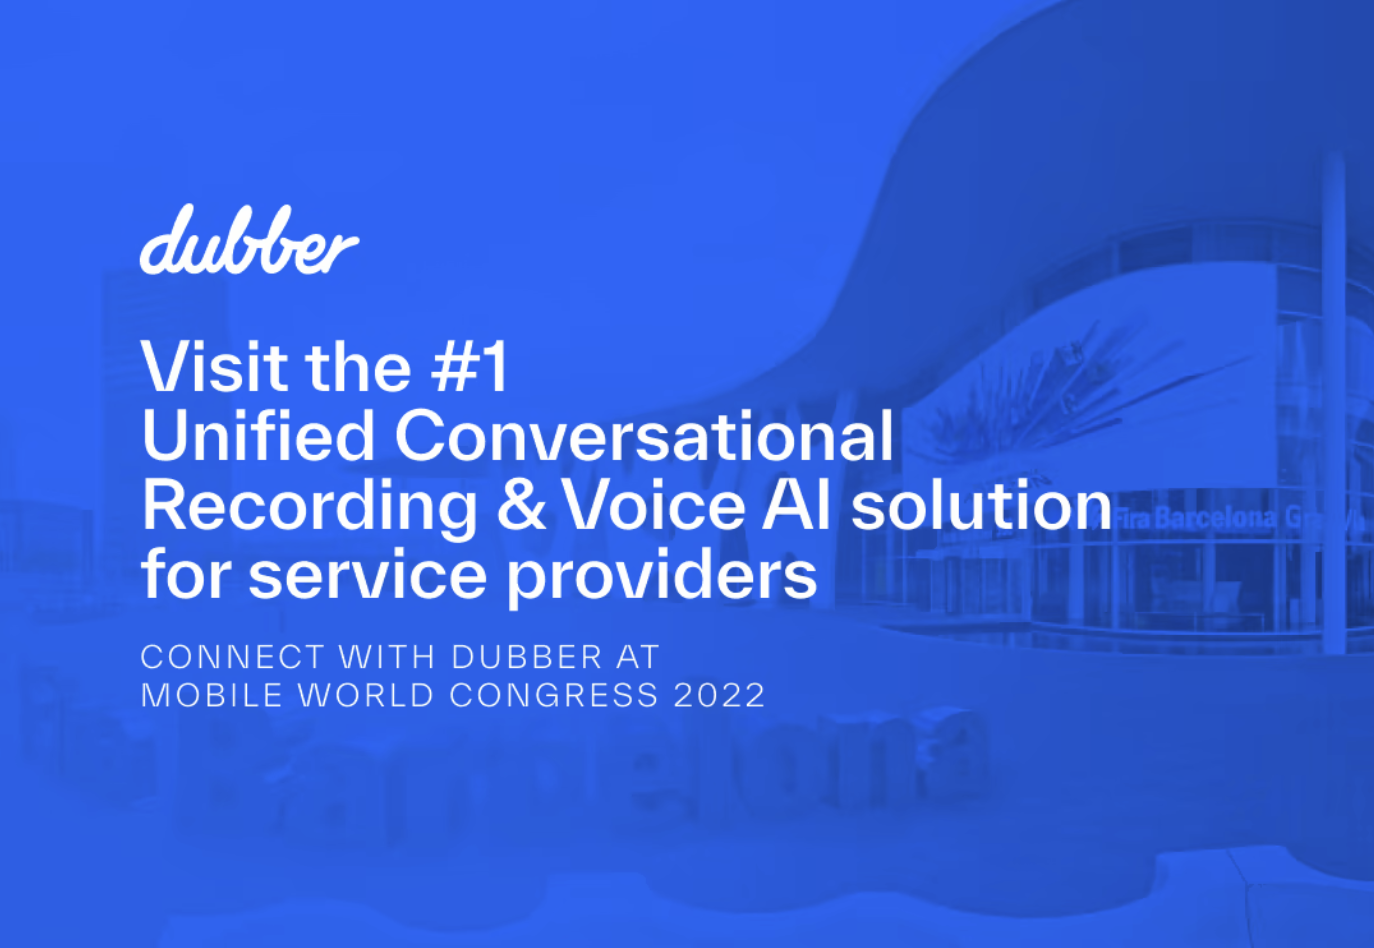 Connect with Dubber at Mobile World Congress 2022!